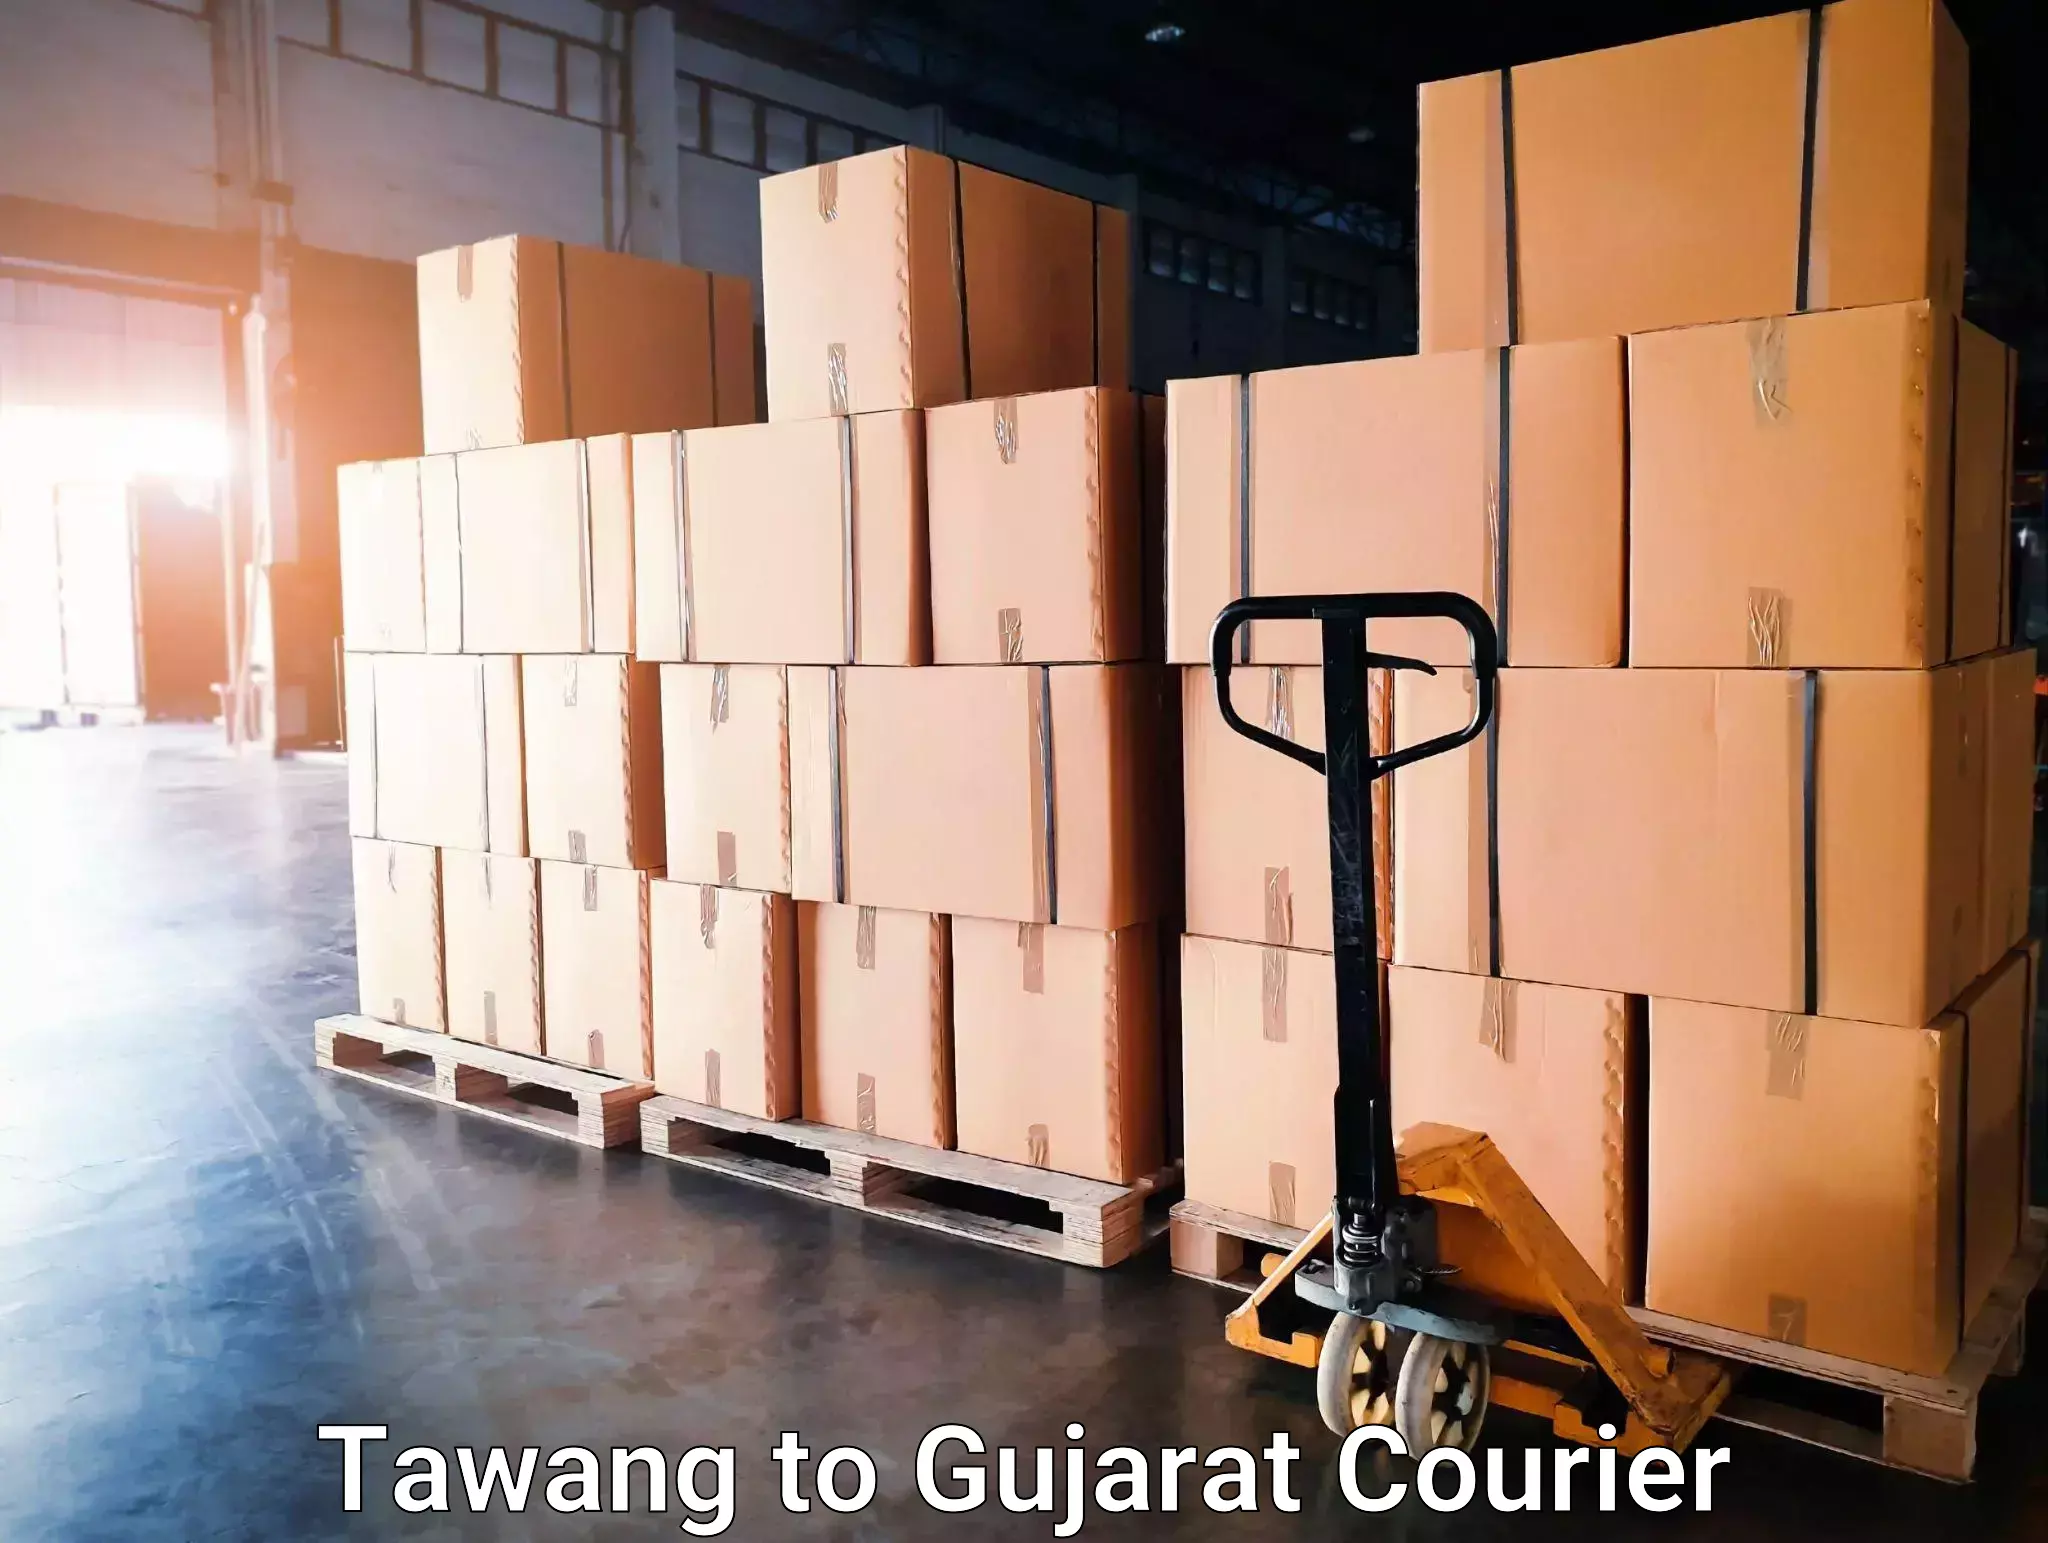 Courier service comparison Tawang to Gujarat